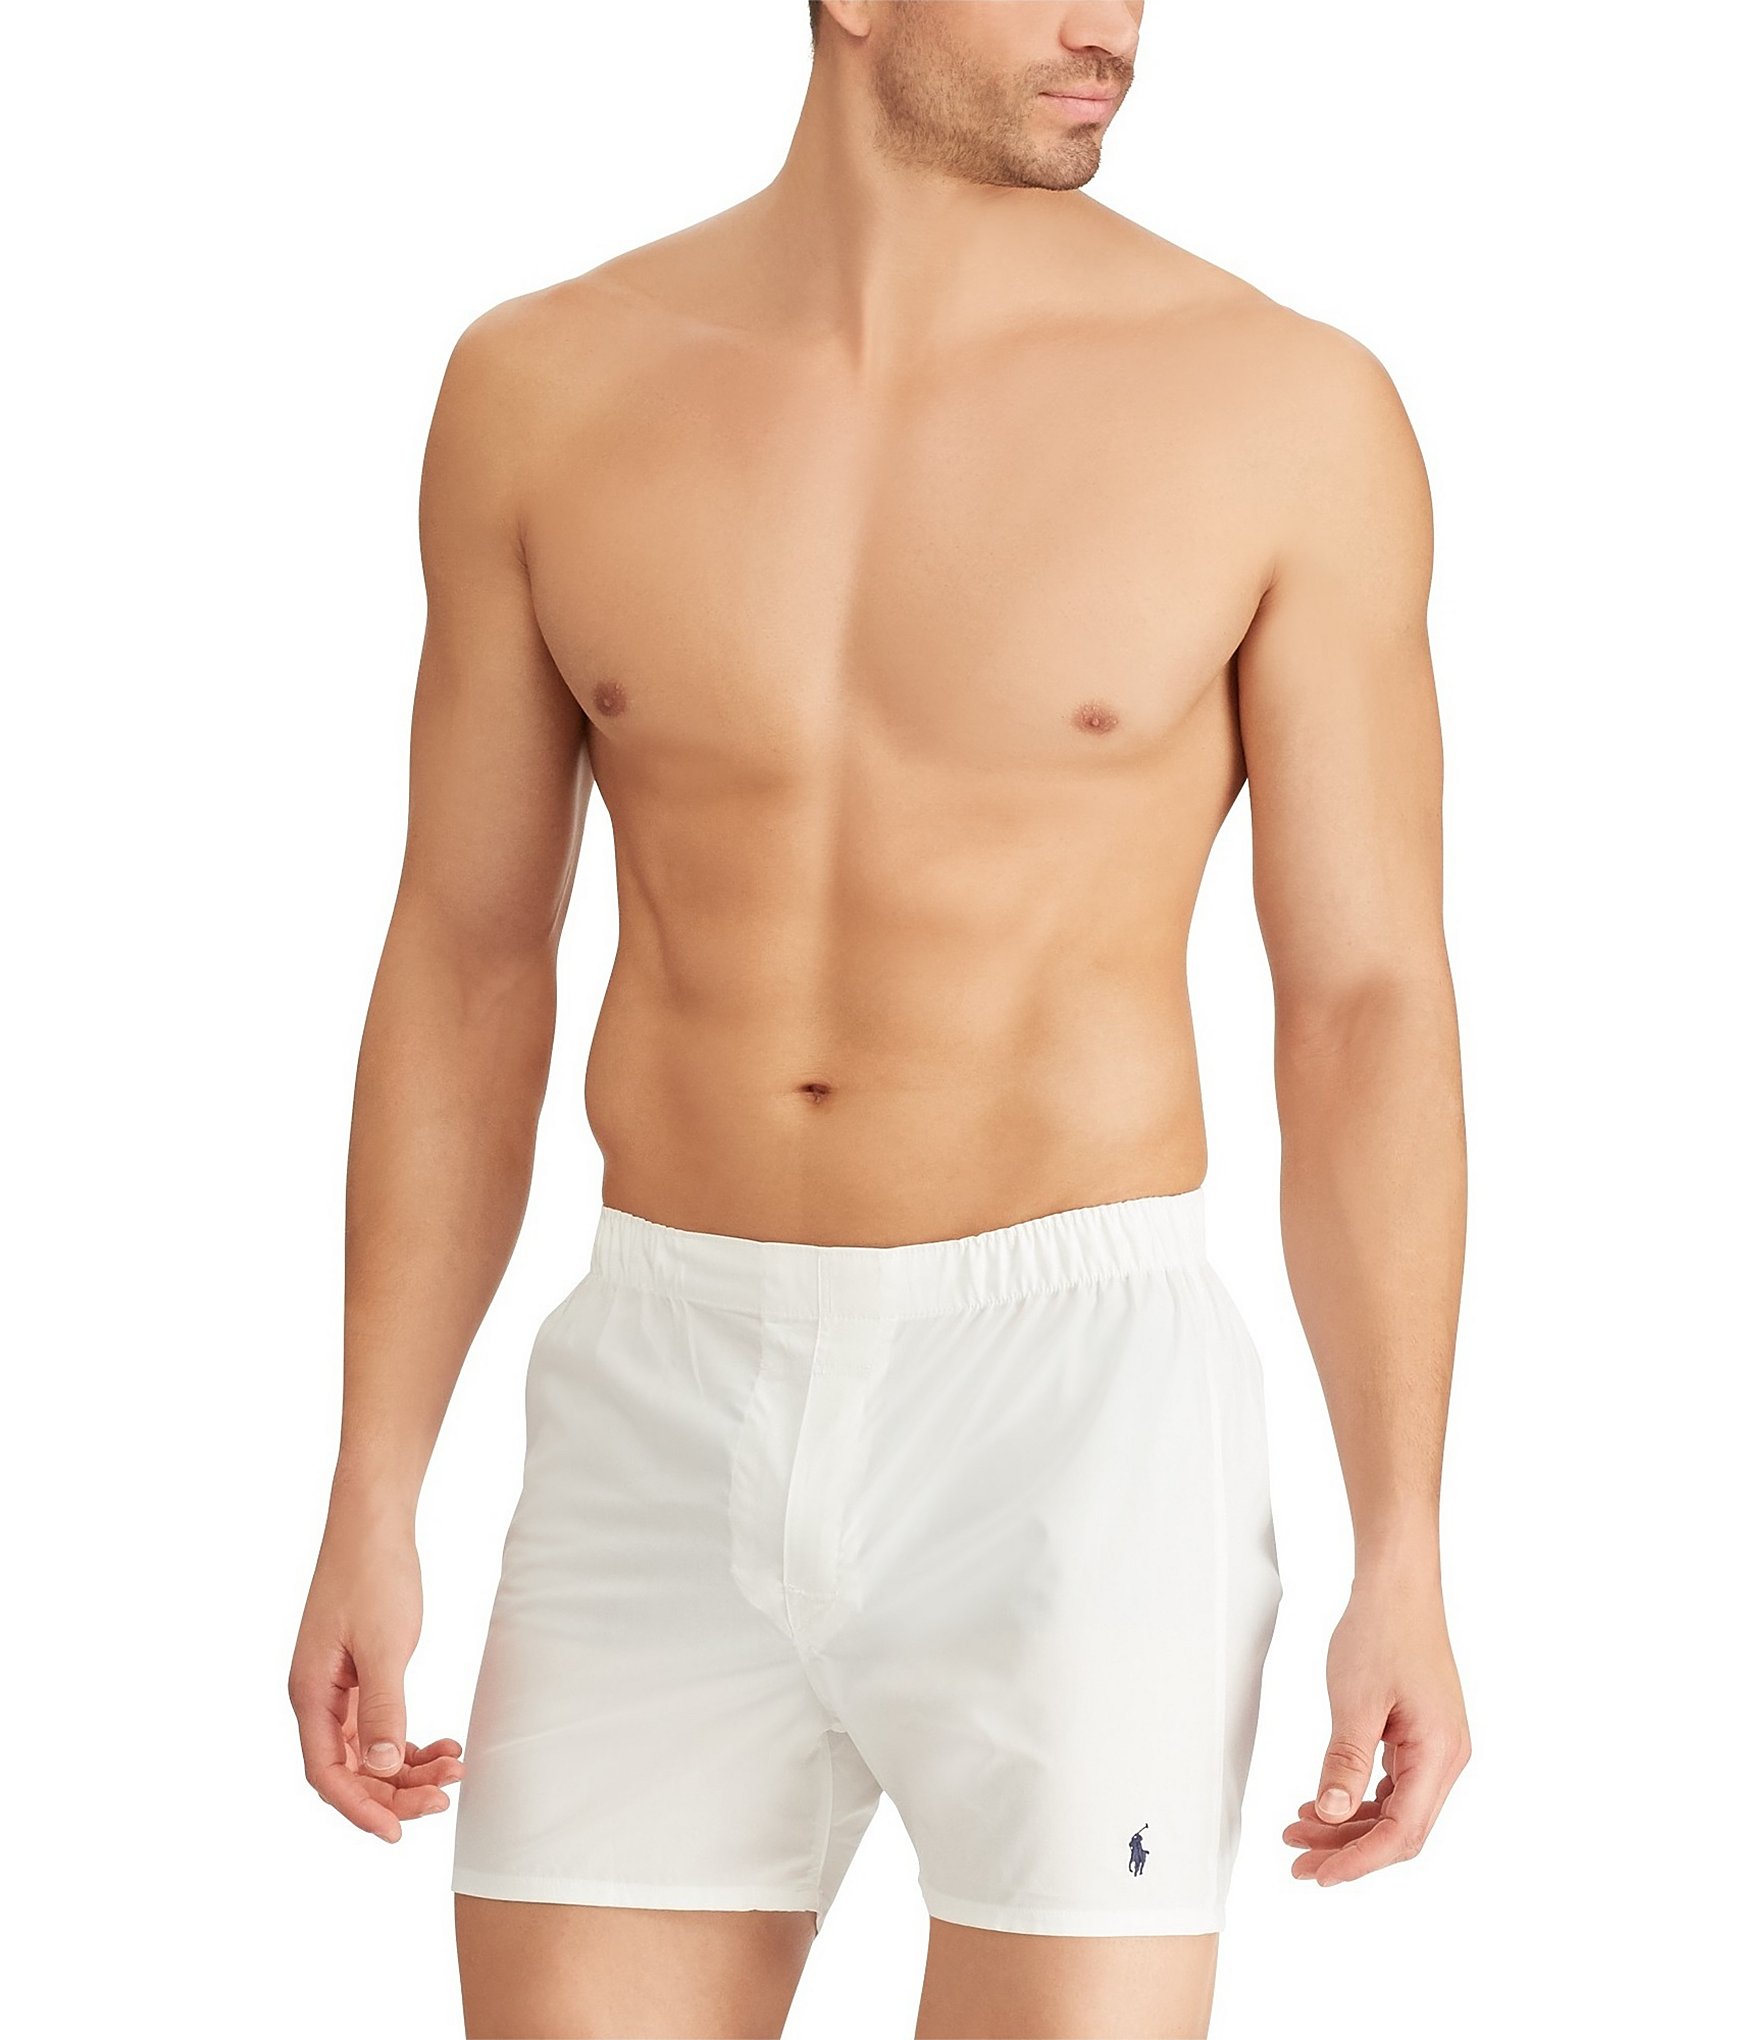 polo boxer briefs 3 pack